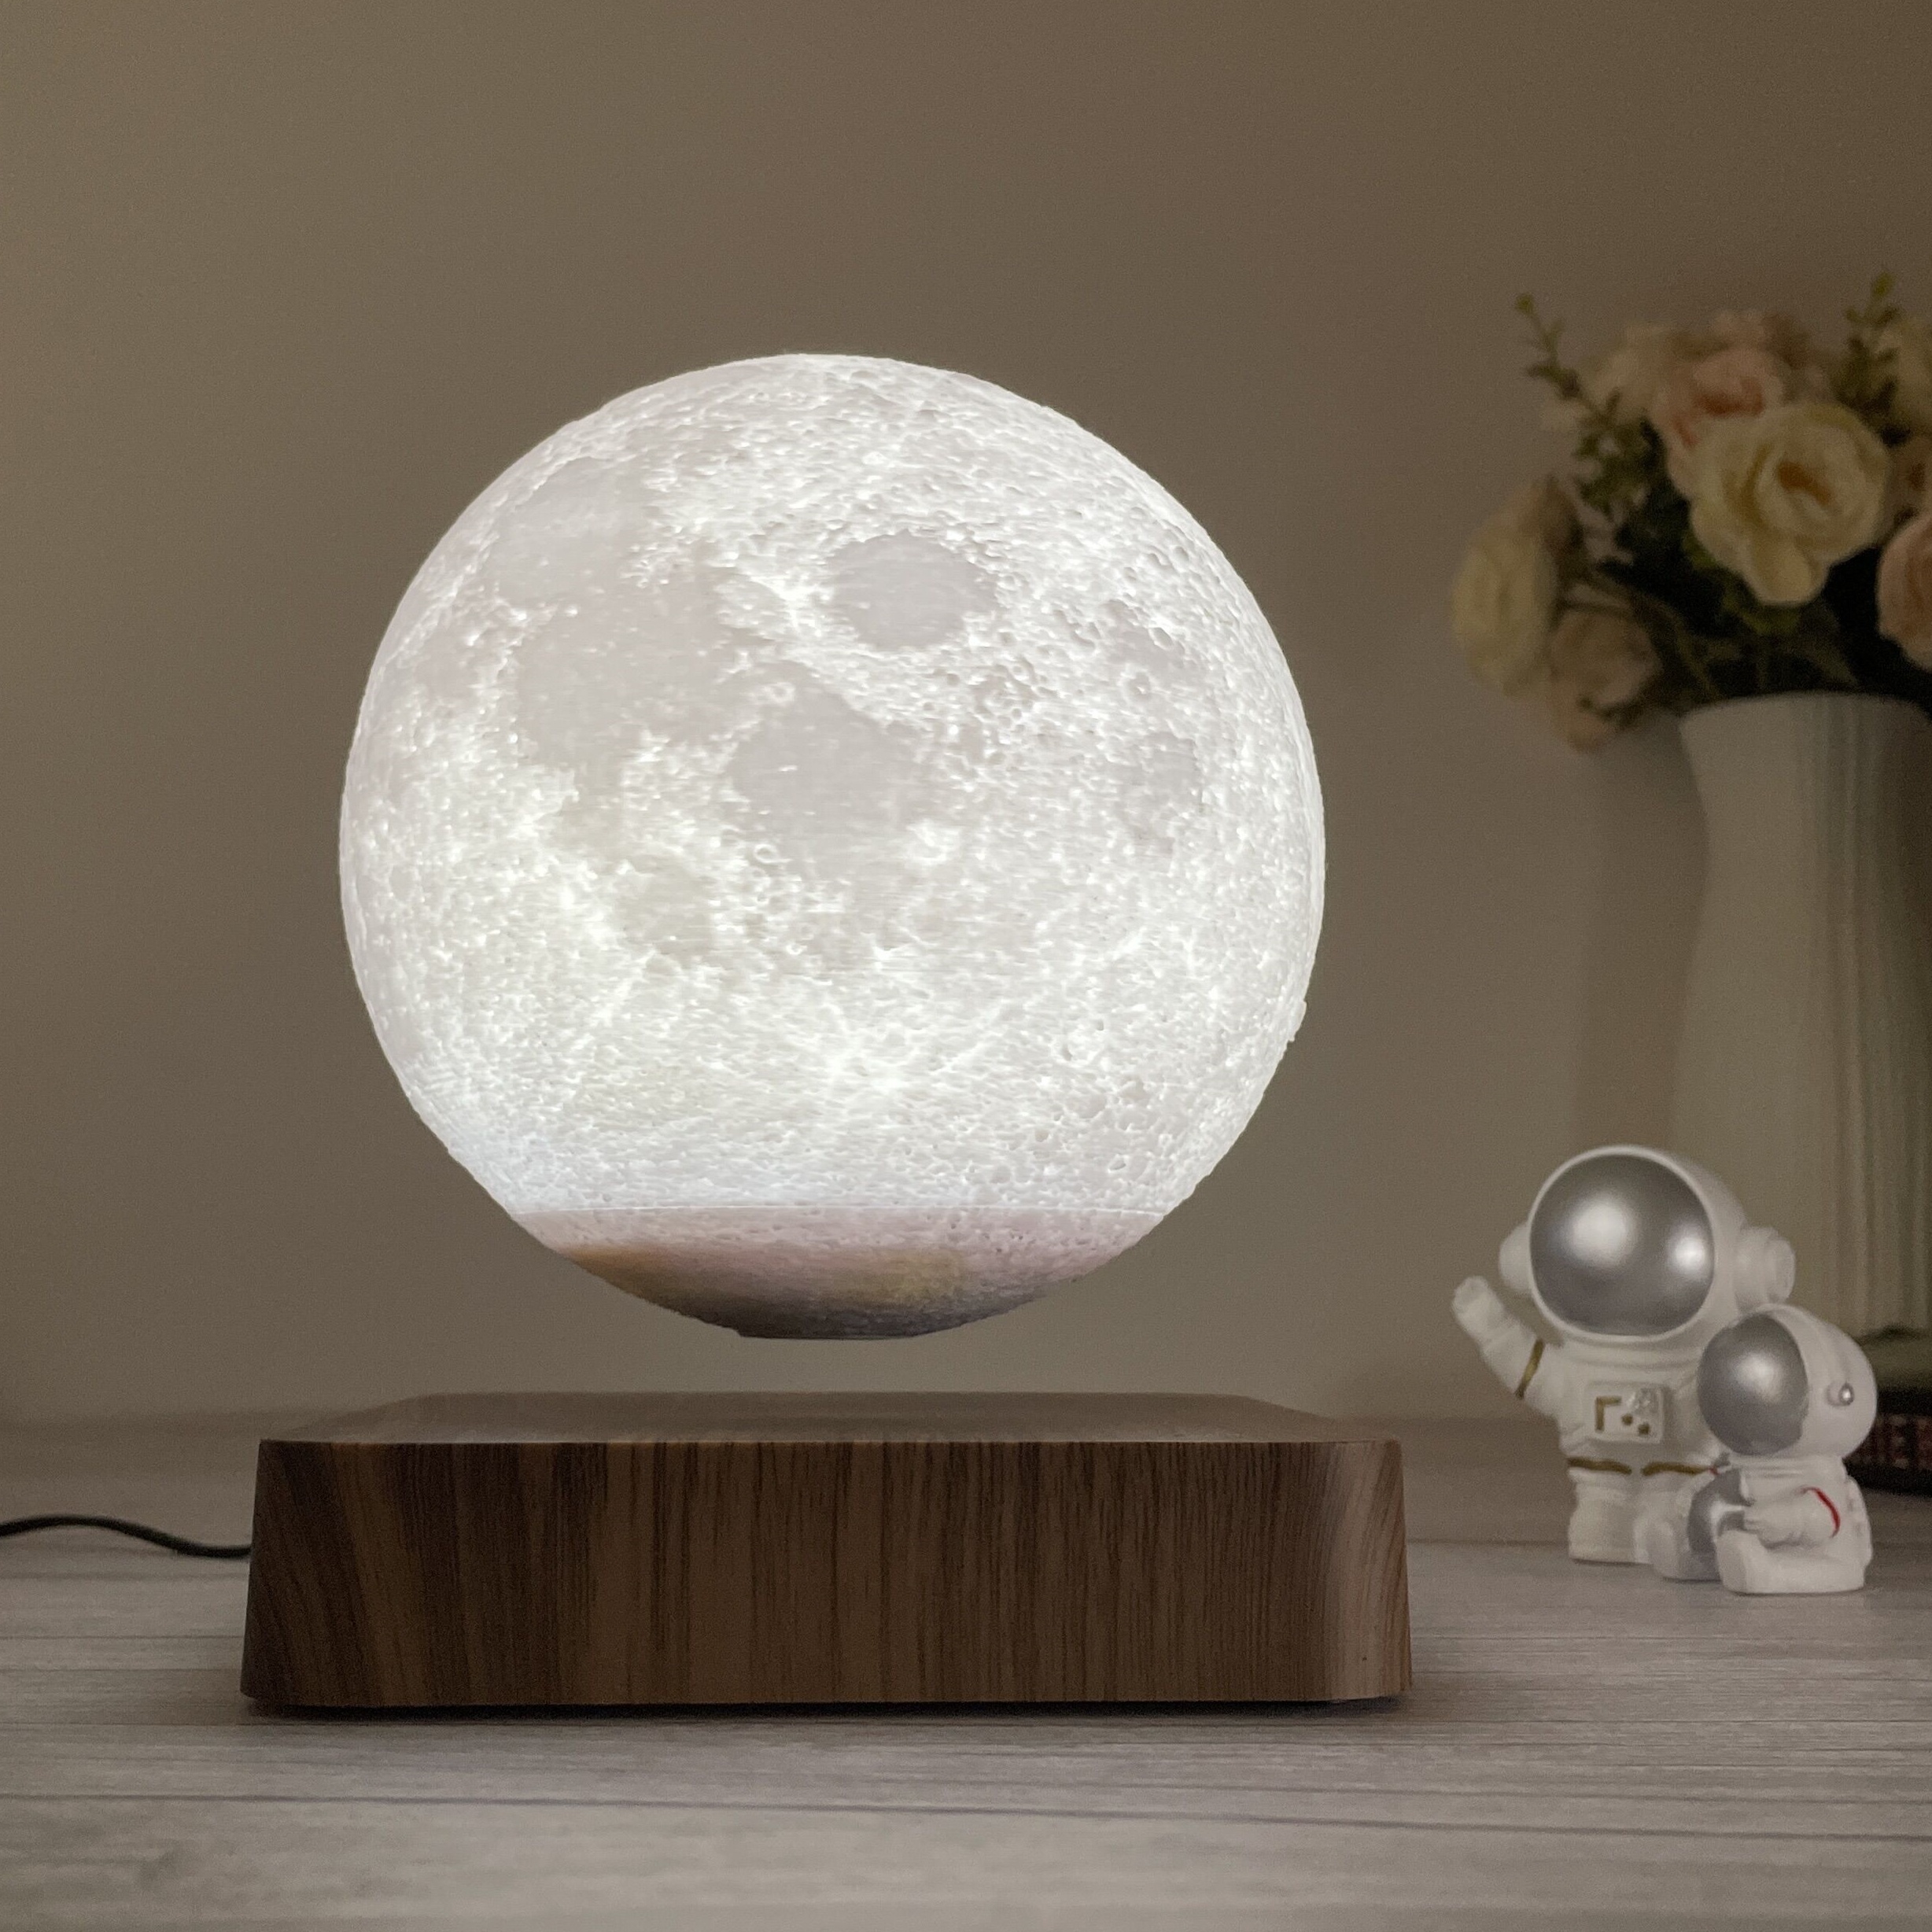 1pc levitating moon table lamp magnetic floating night light with 3 lighting modes 3d printed levitation bedside table lamp for office bedroom home decoration details 8